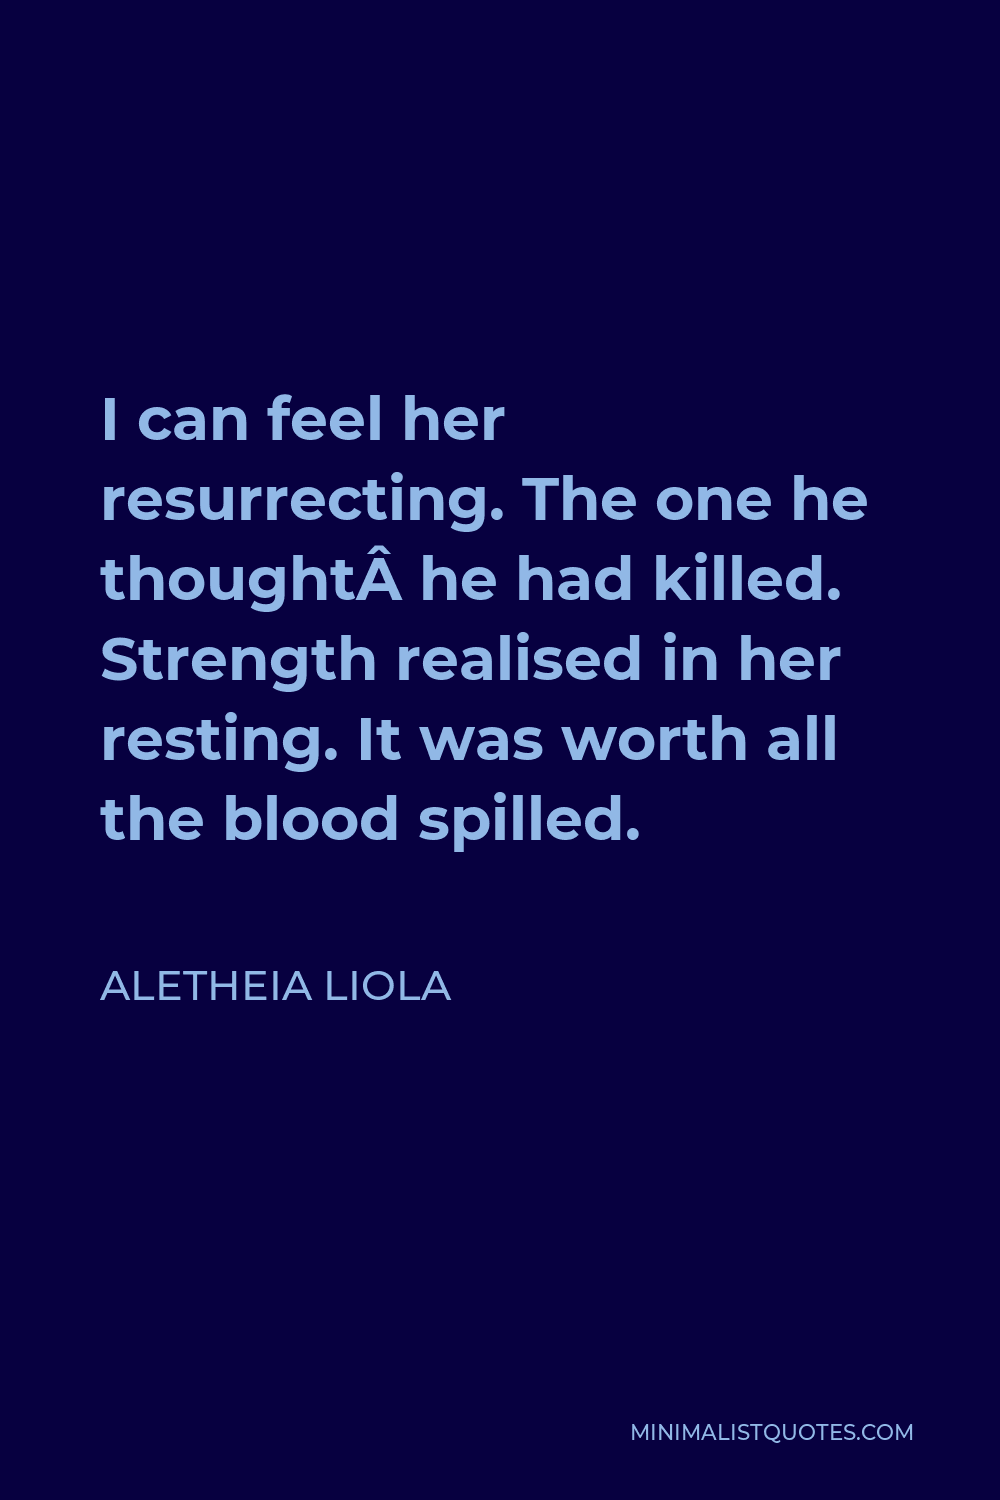 Aletheia Liola Quote - I can feel her resurrecting. The one he thought he had killed. Strength realised in her resting. It was worth all the blood spilled.